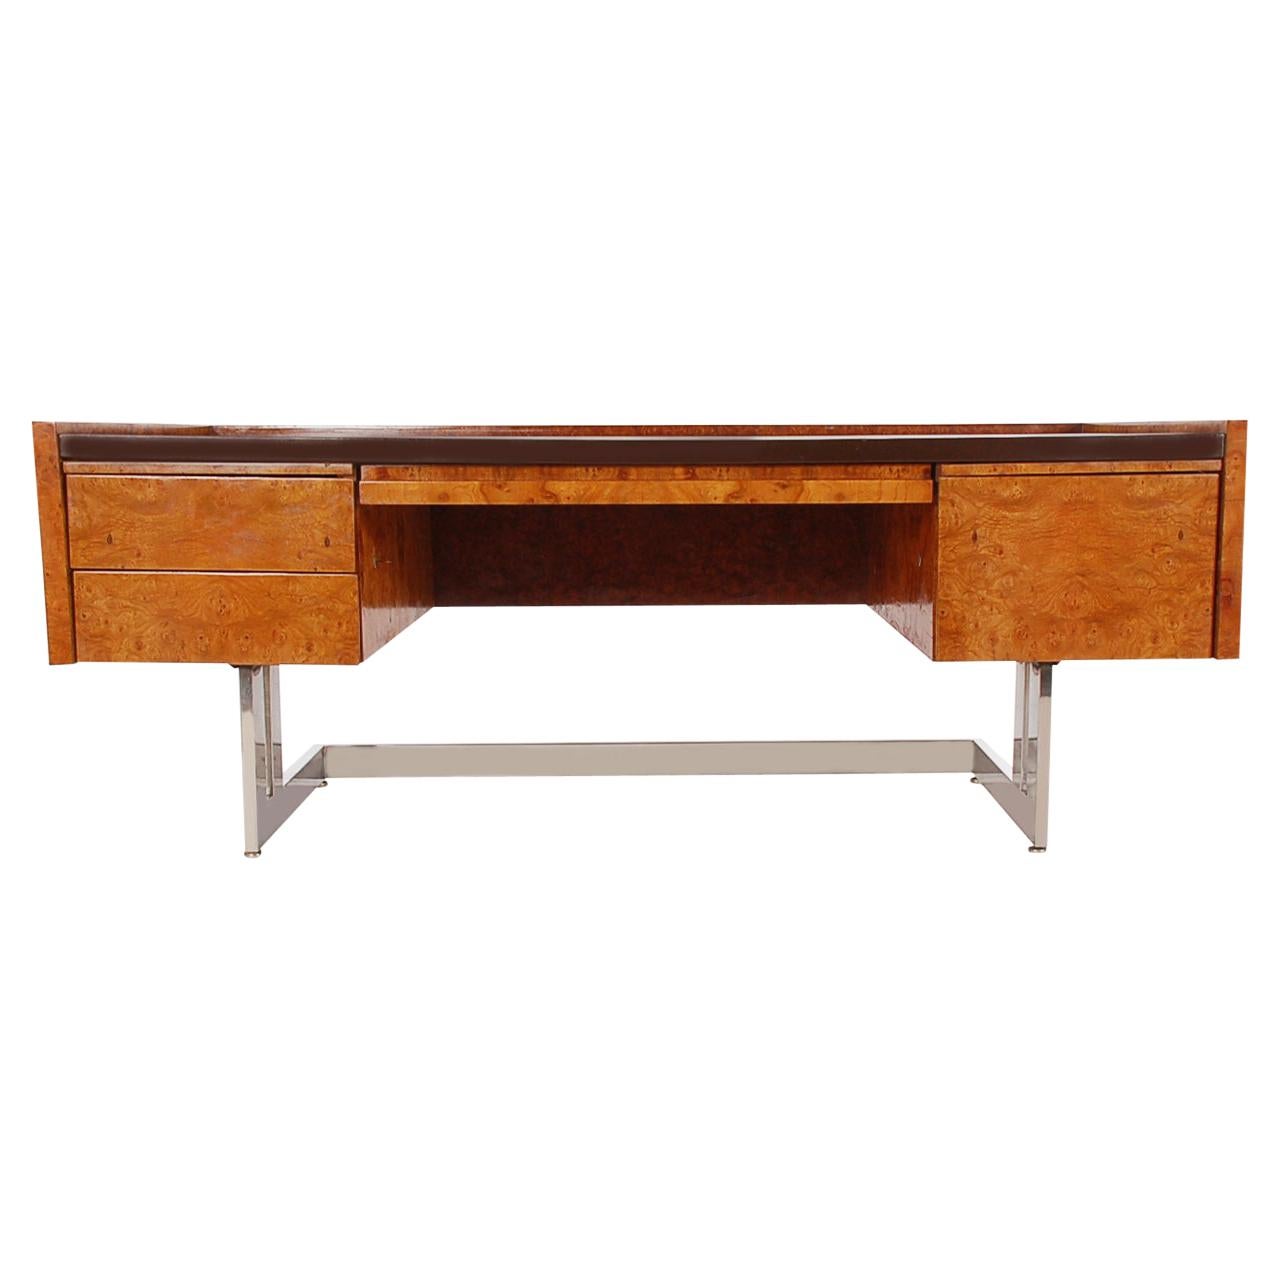 Monumental Cantilevered Mid-Century Modern Executive Desk in Burl and Chrome